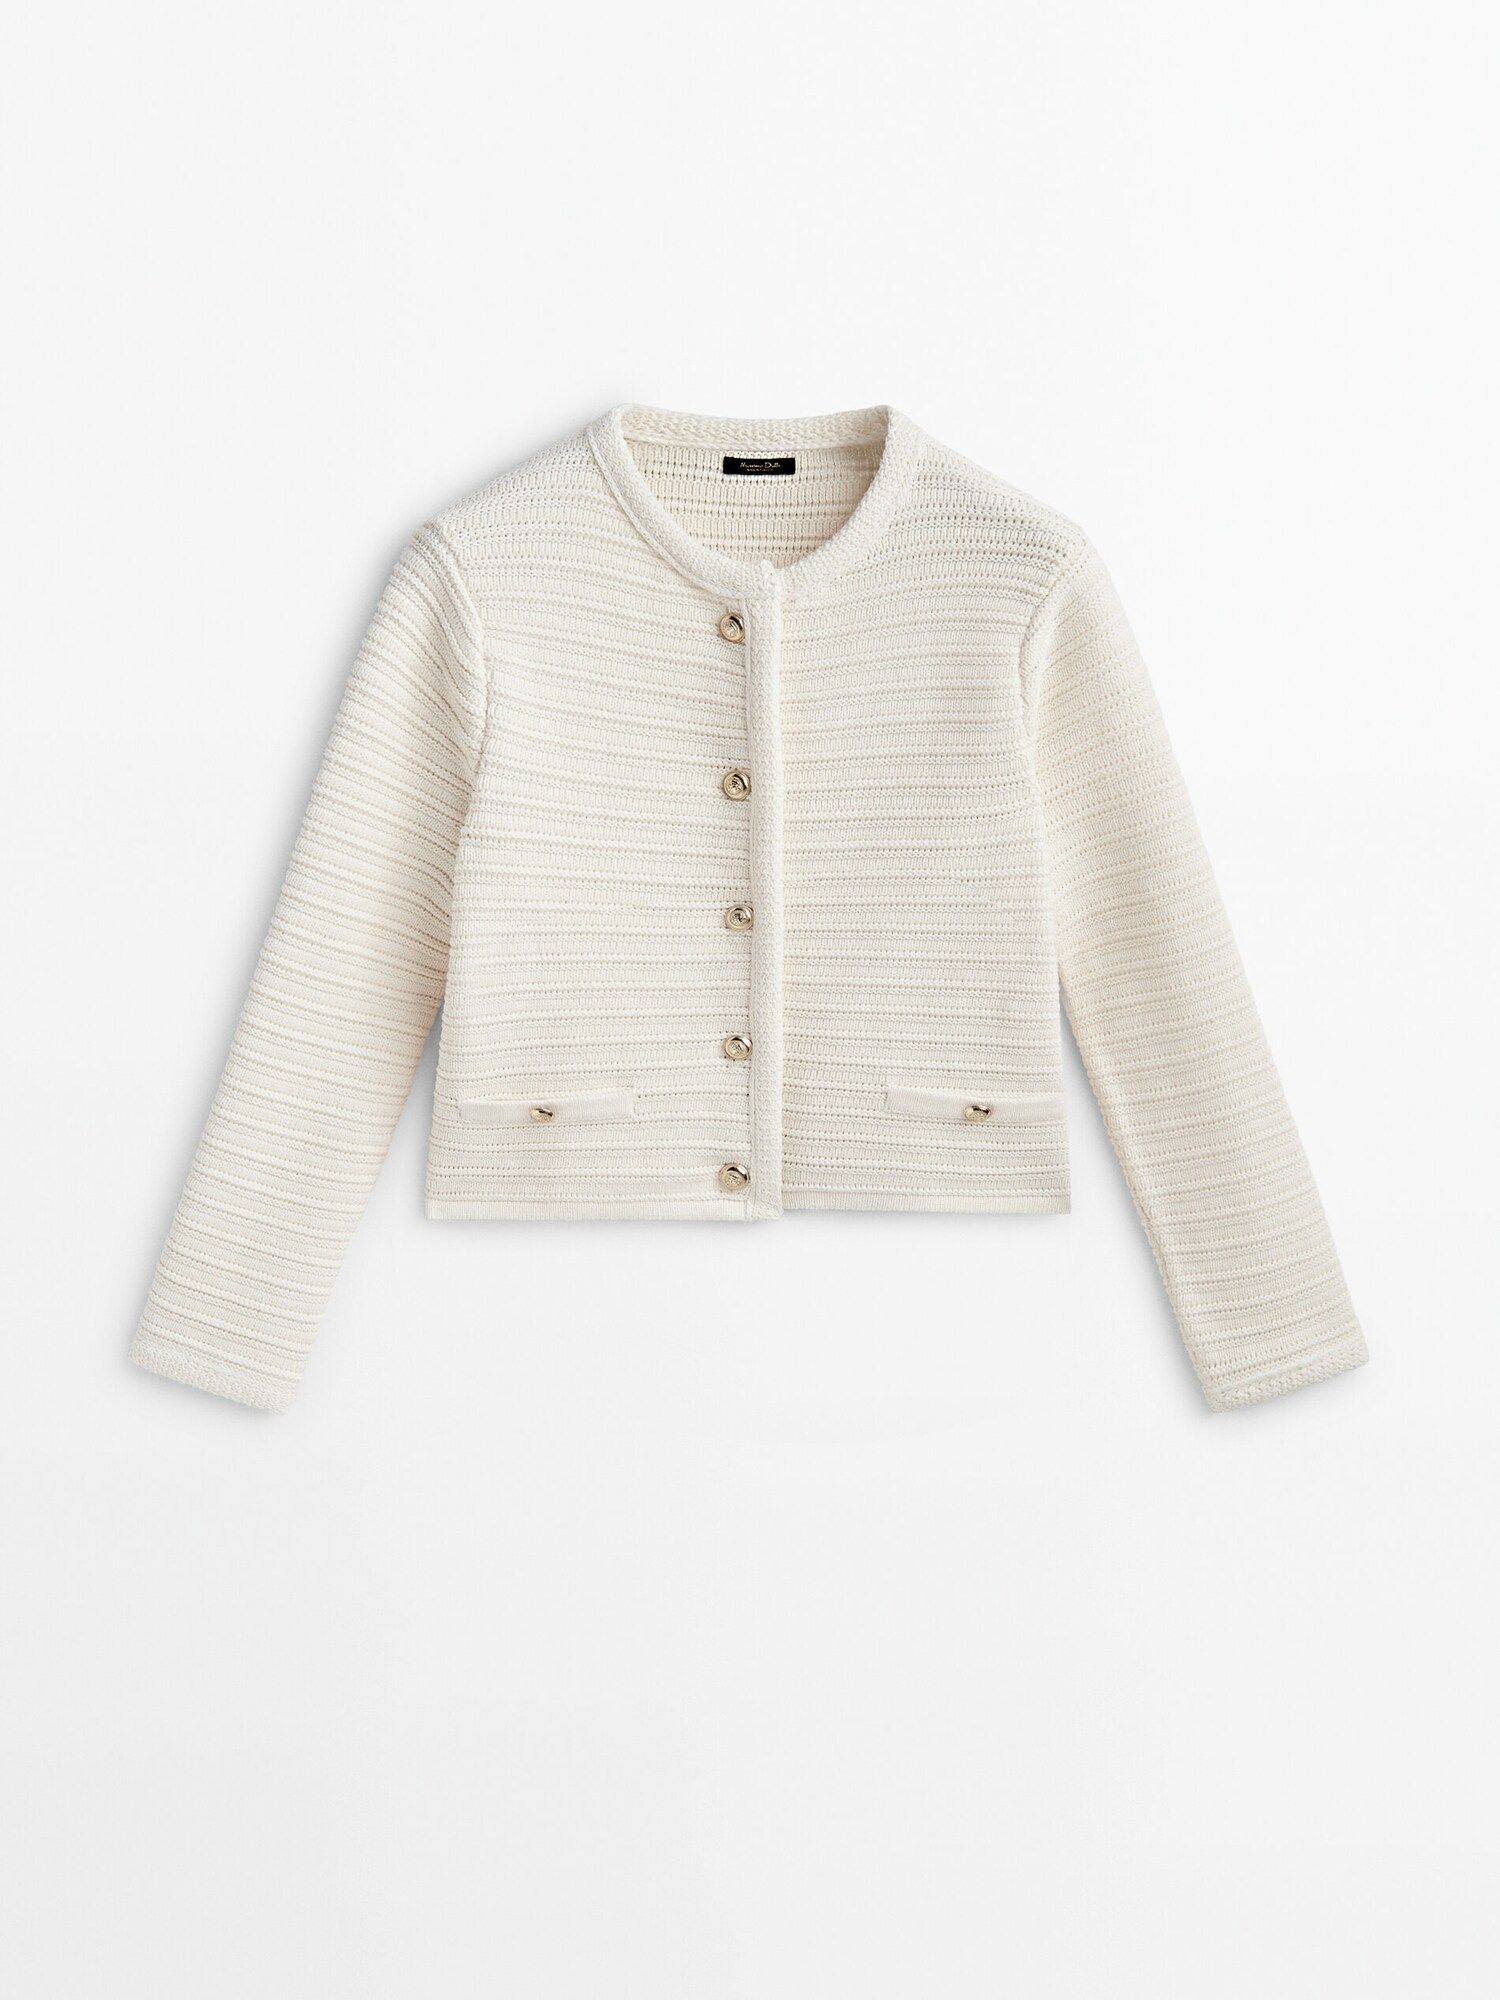 Textured knit cardigan with gold buttons | Massimo Dutti (US)